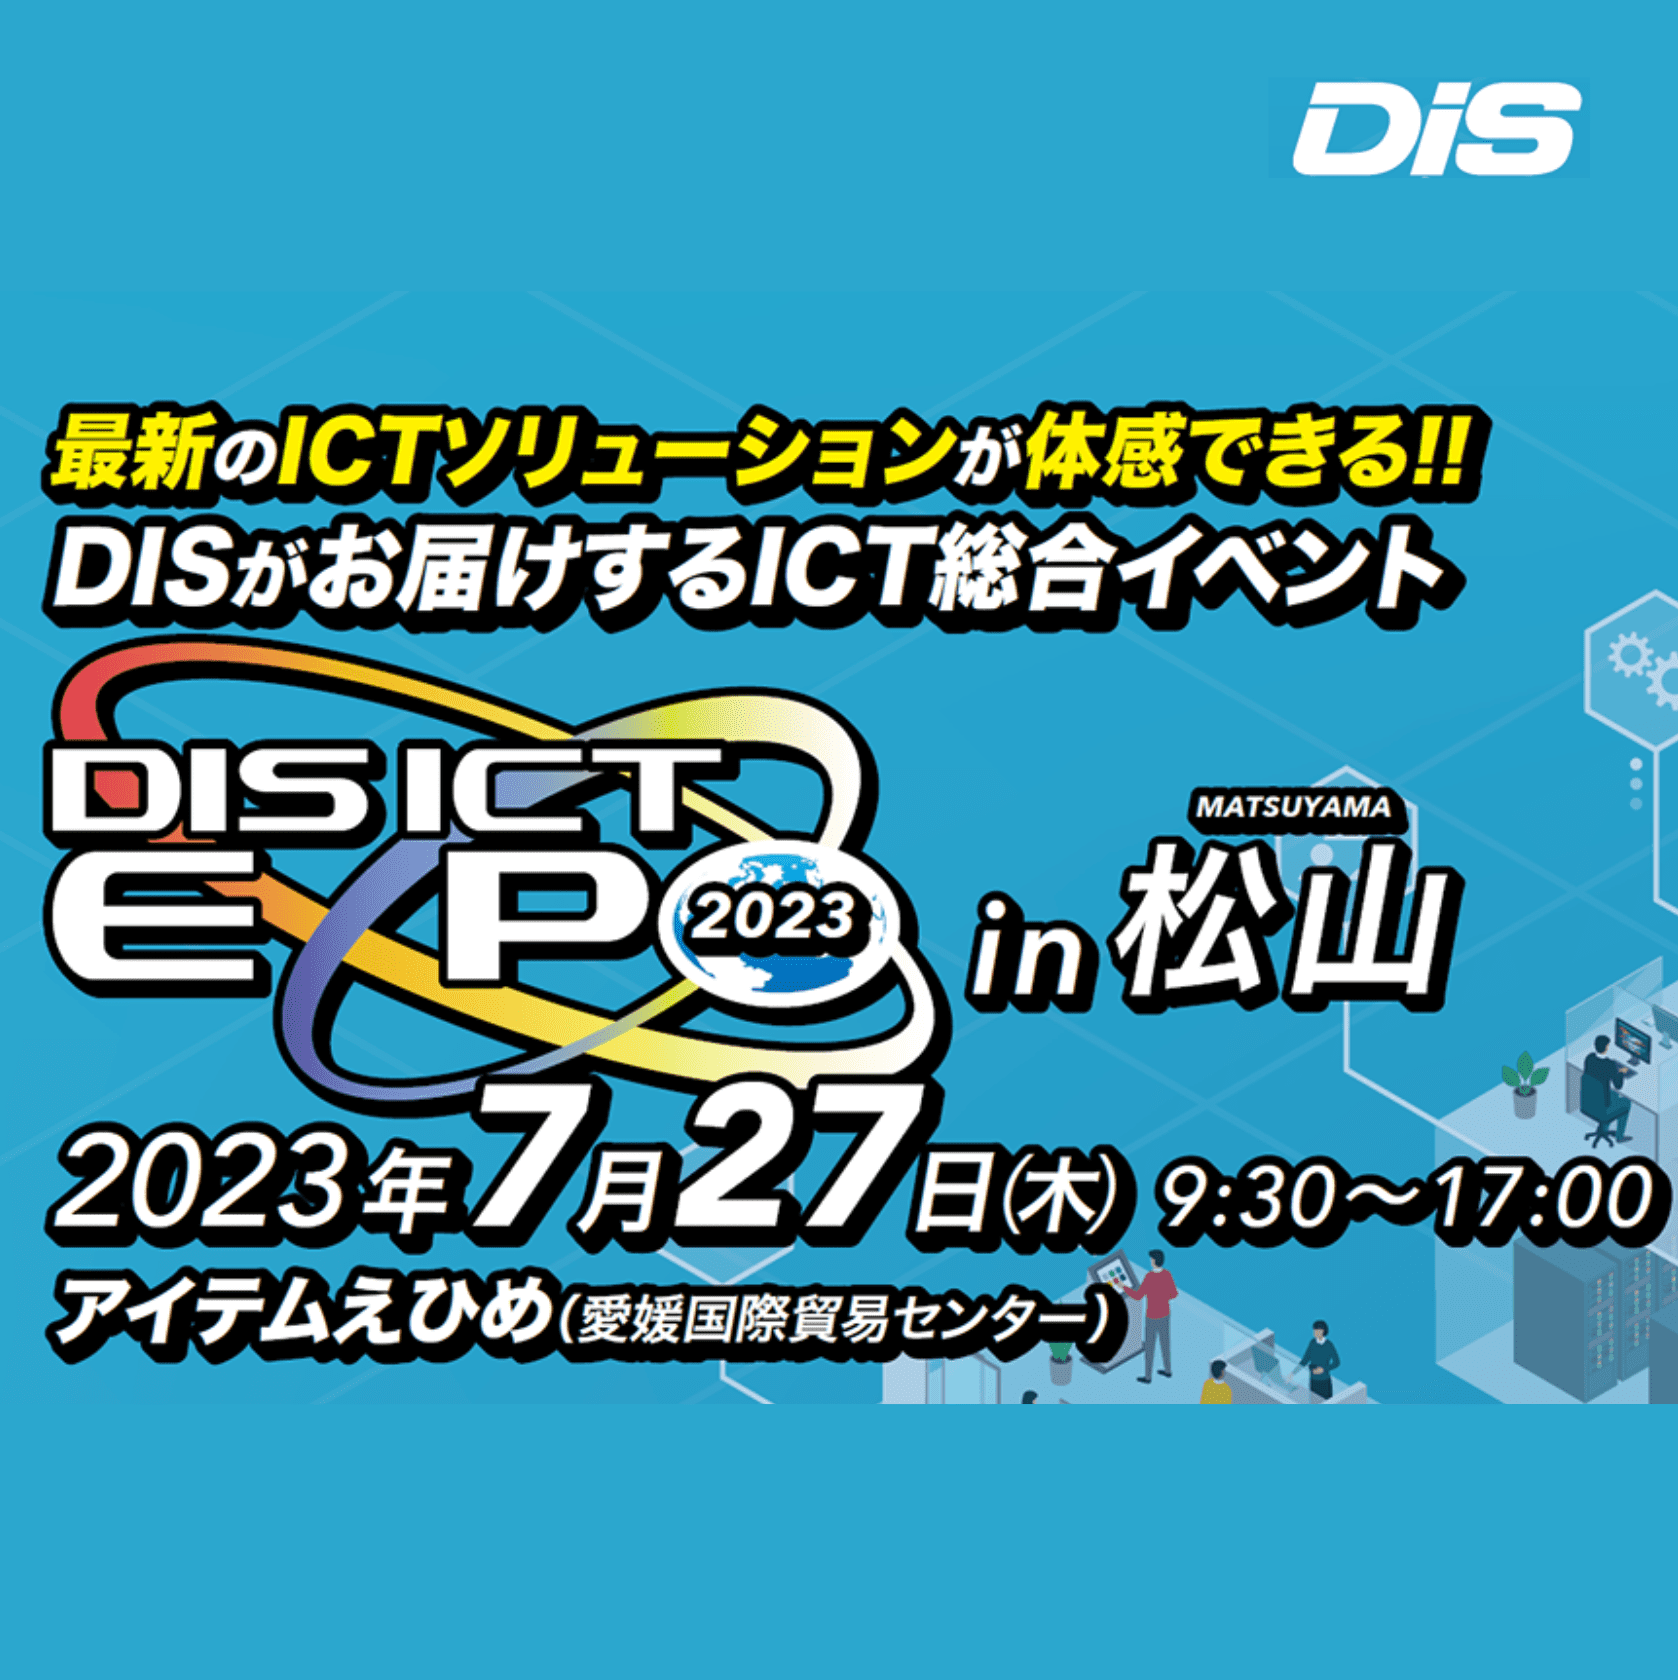 DIS ICT EXPO 2023 in 松山 出展レポート